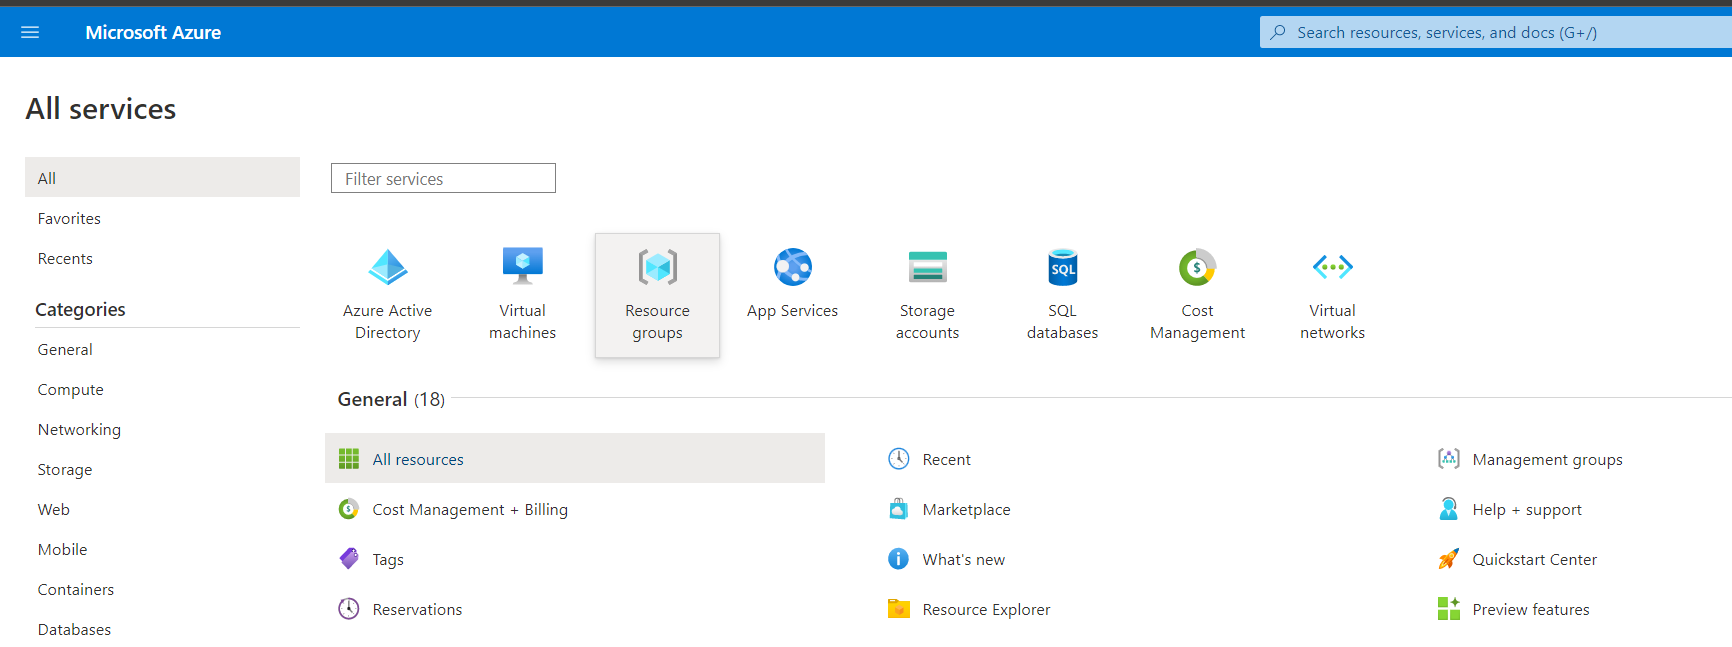 ../../_images/azure_resource_groups.png